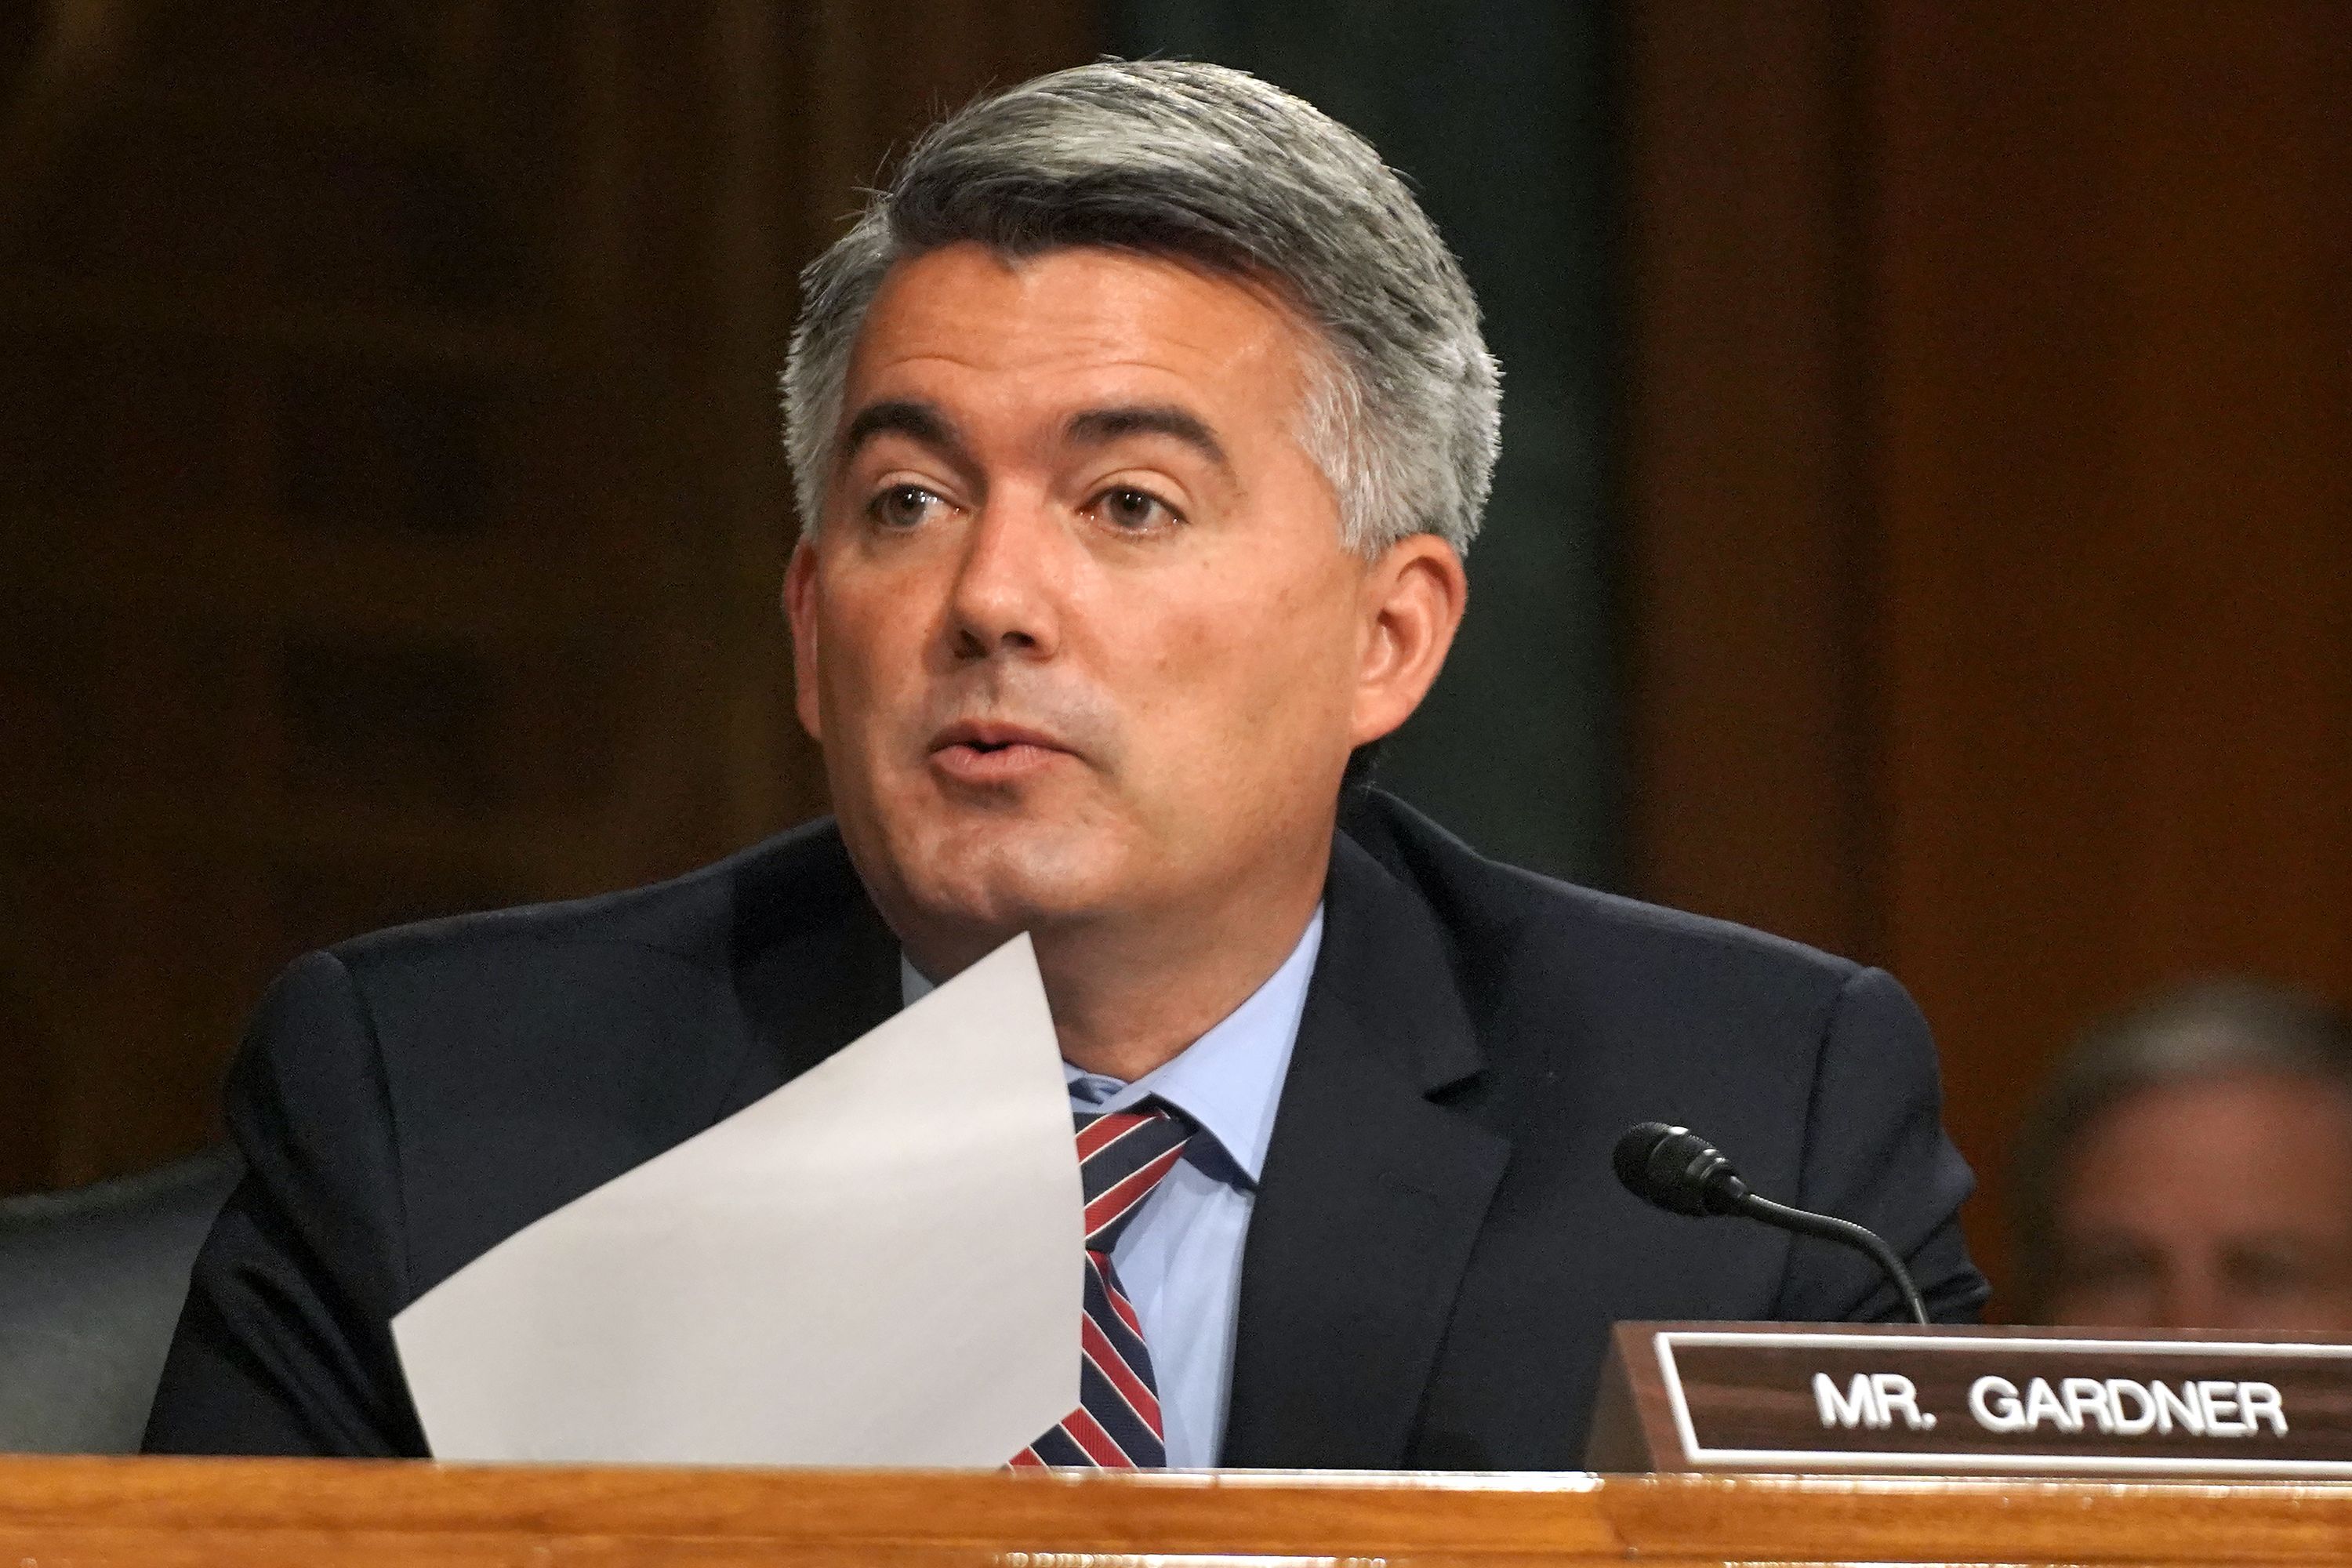 Sen. Cory Gardner during a Senate Foreign Relations committee hearing in the Dirksen Senate Office Building in Washington on July 30, 2020.